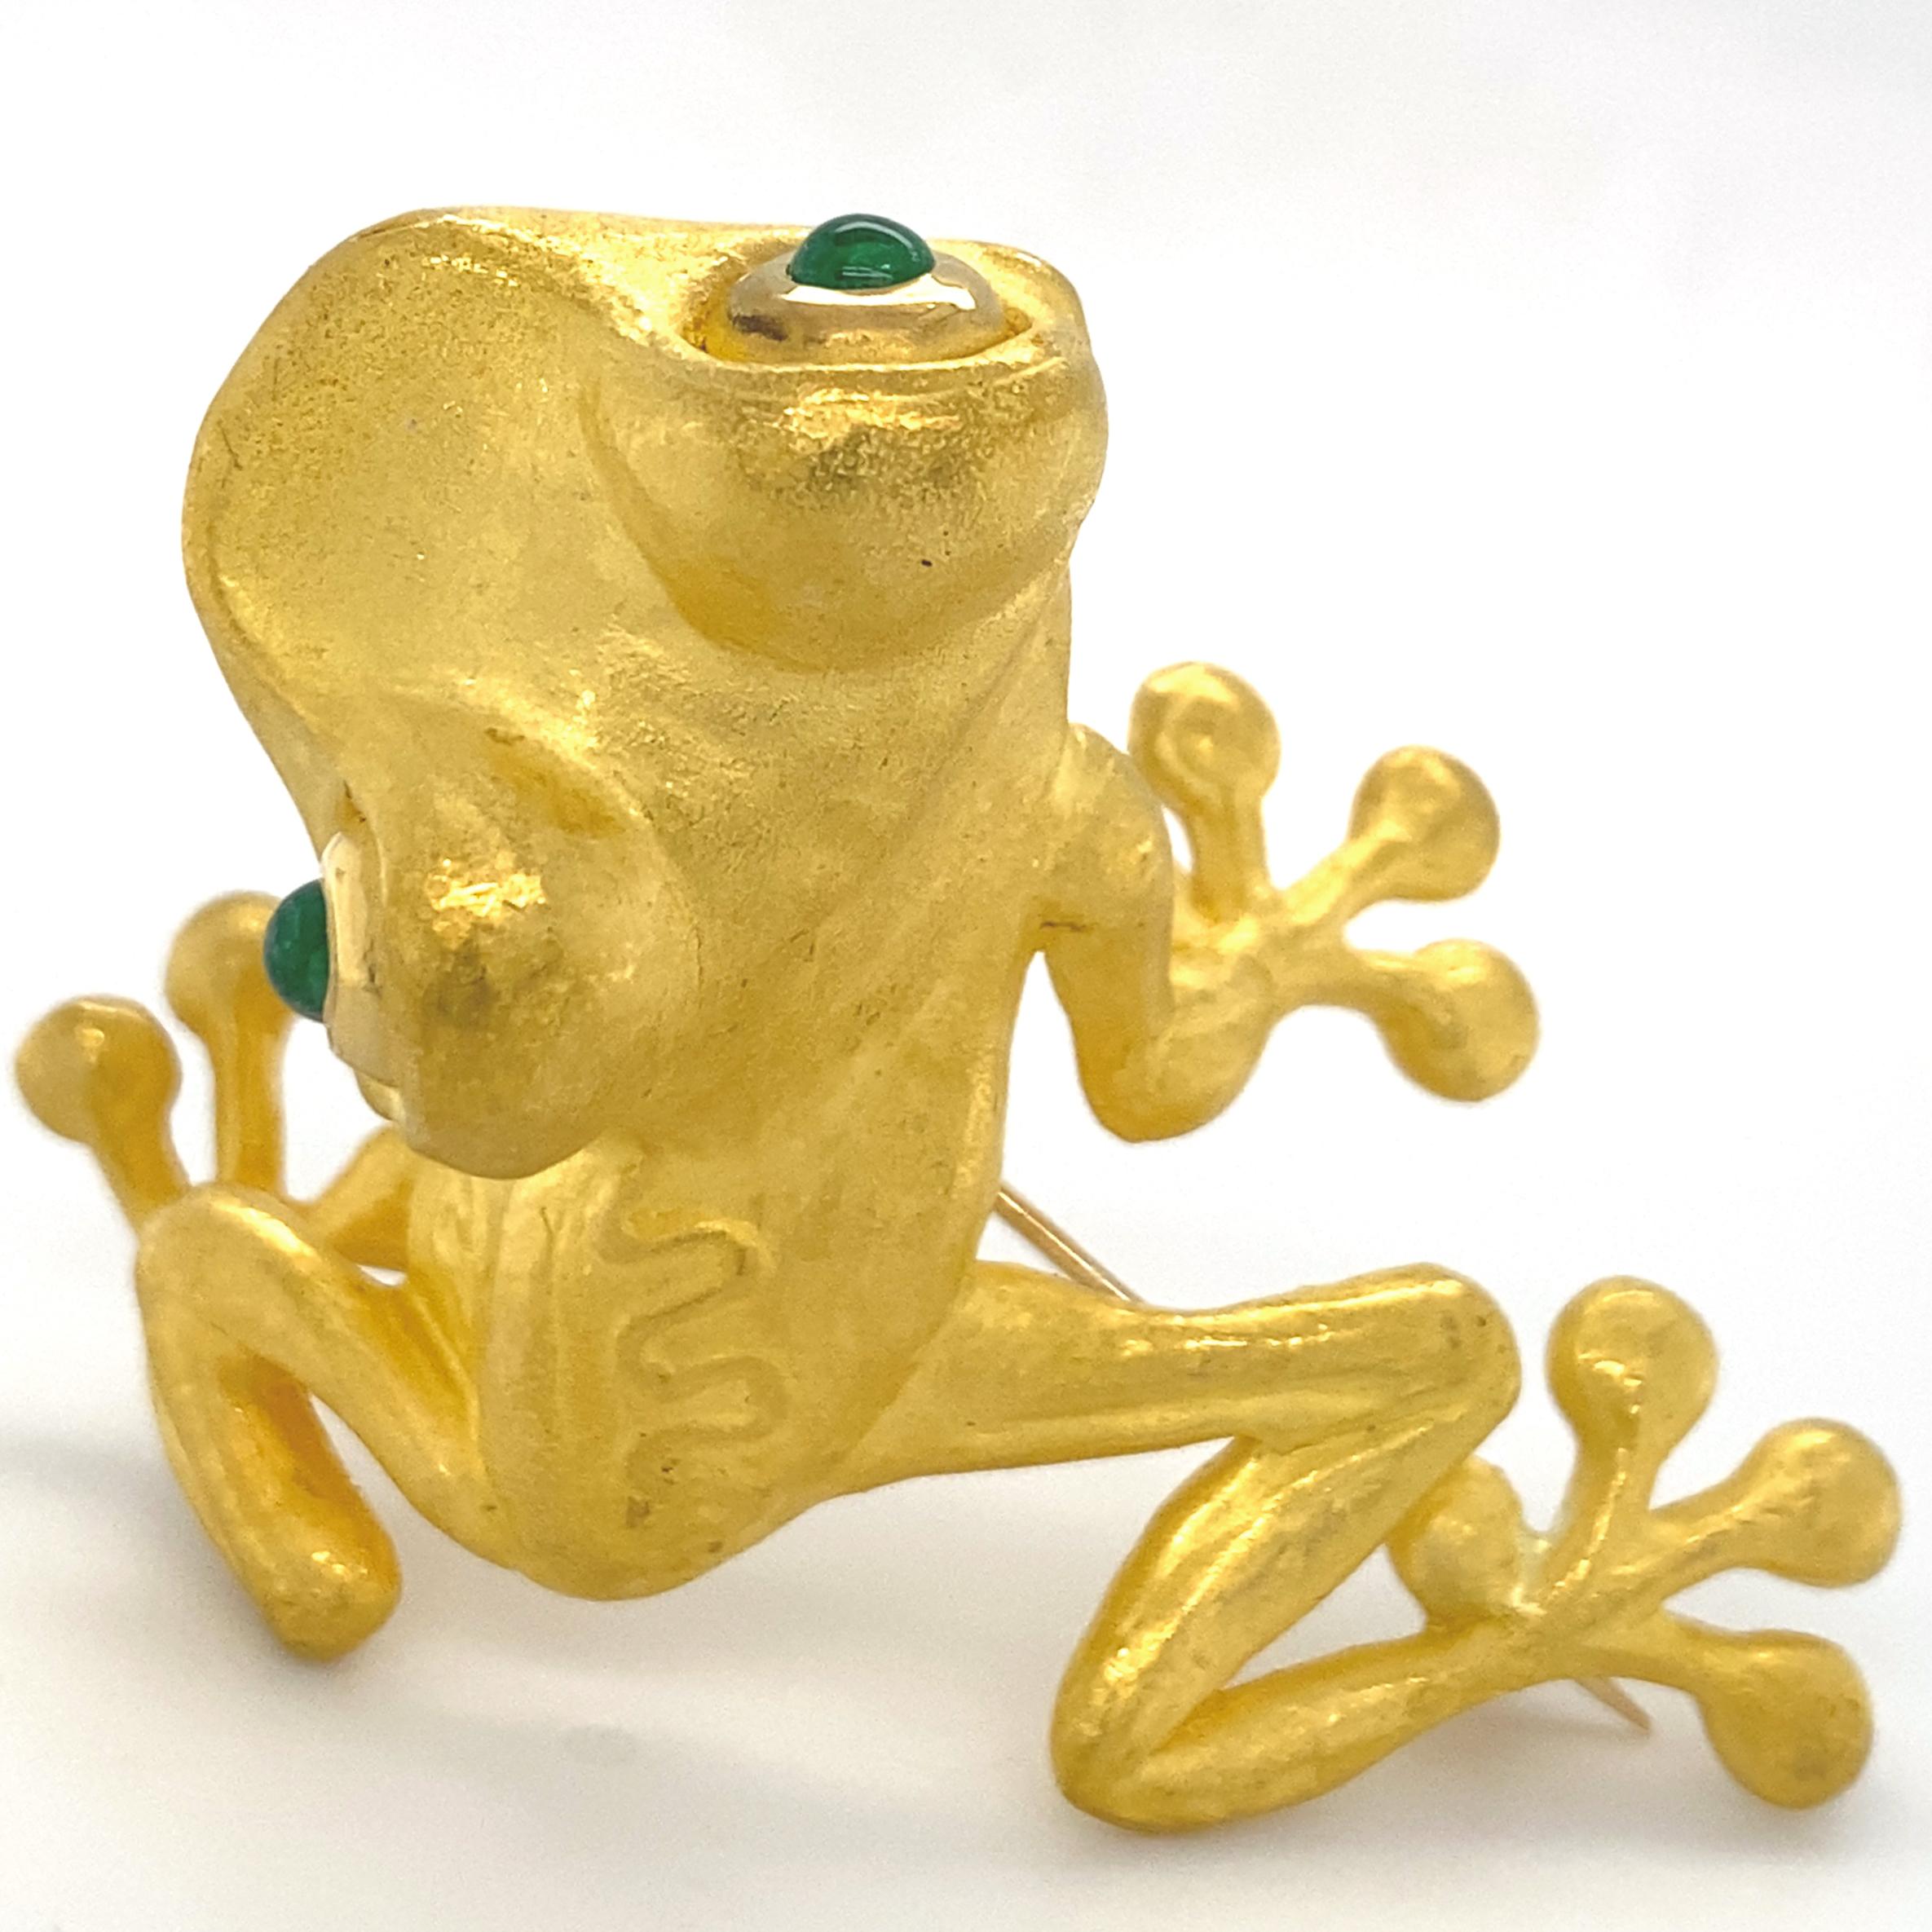 Cabochon Large 22K Yellow Gold Tree Frog Brooch with Emerald Eyes